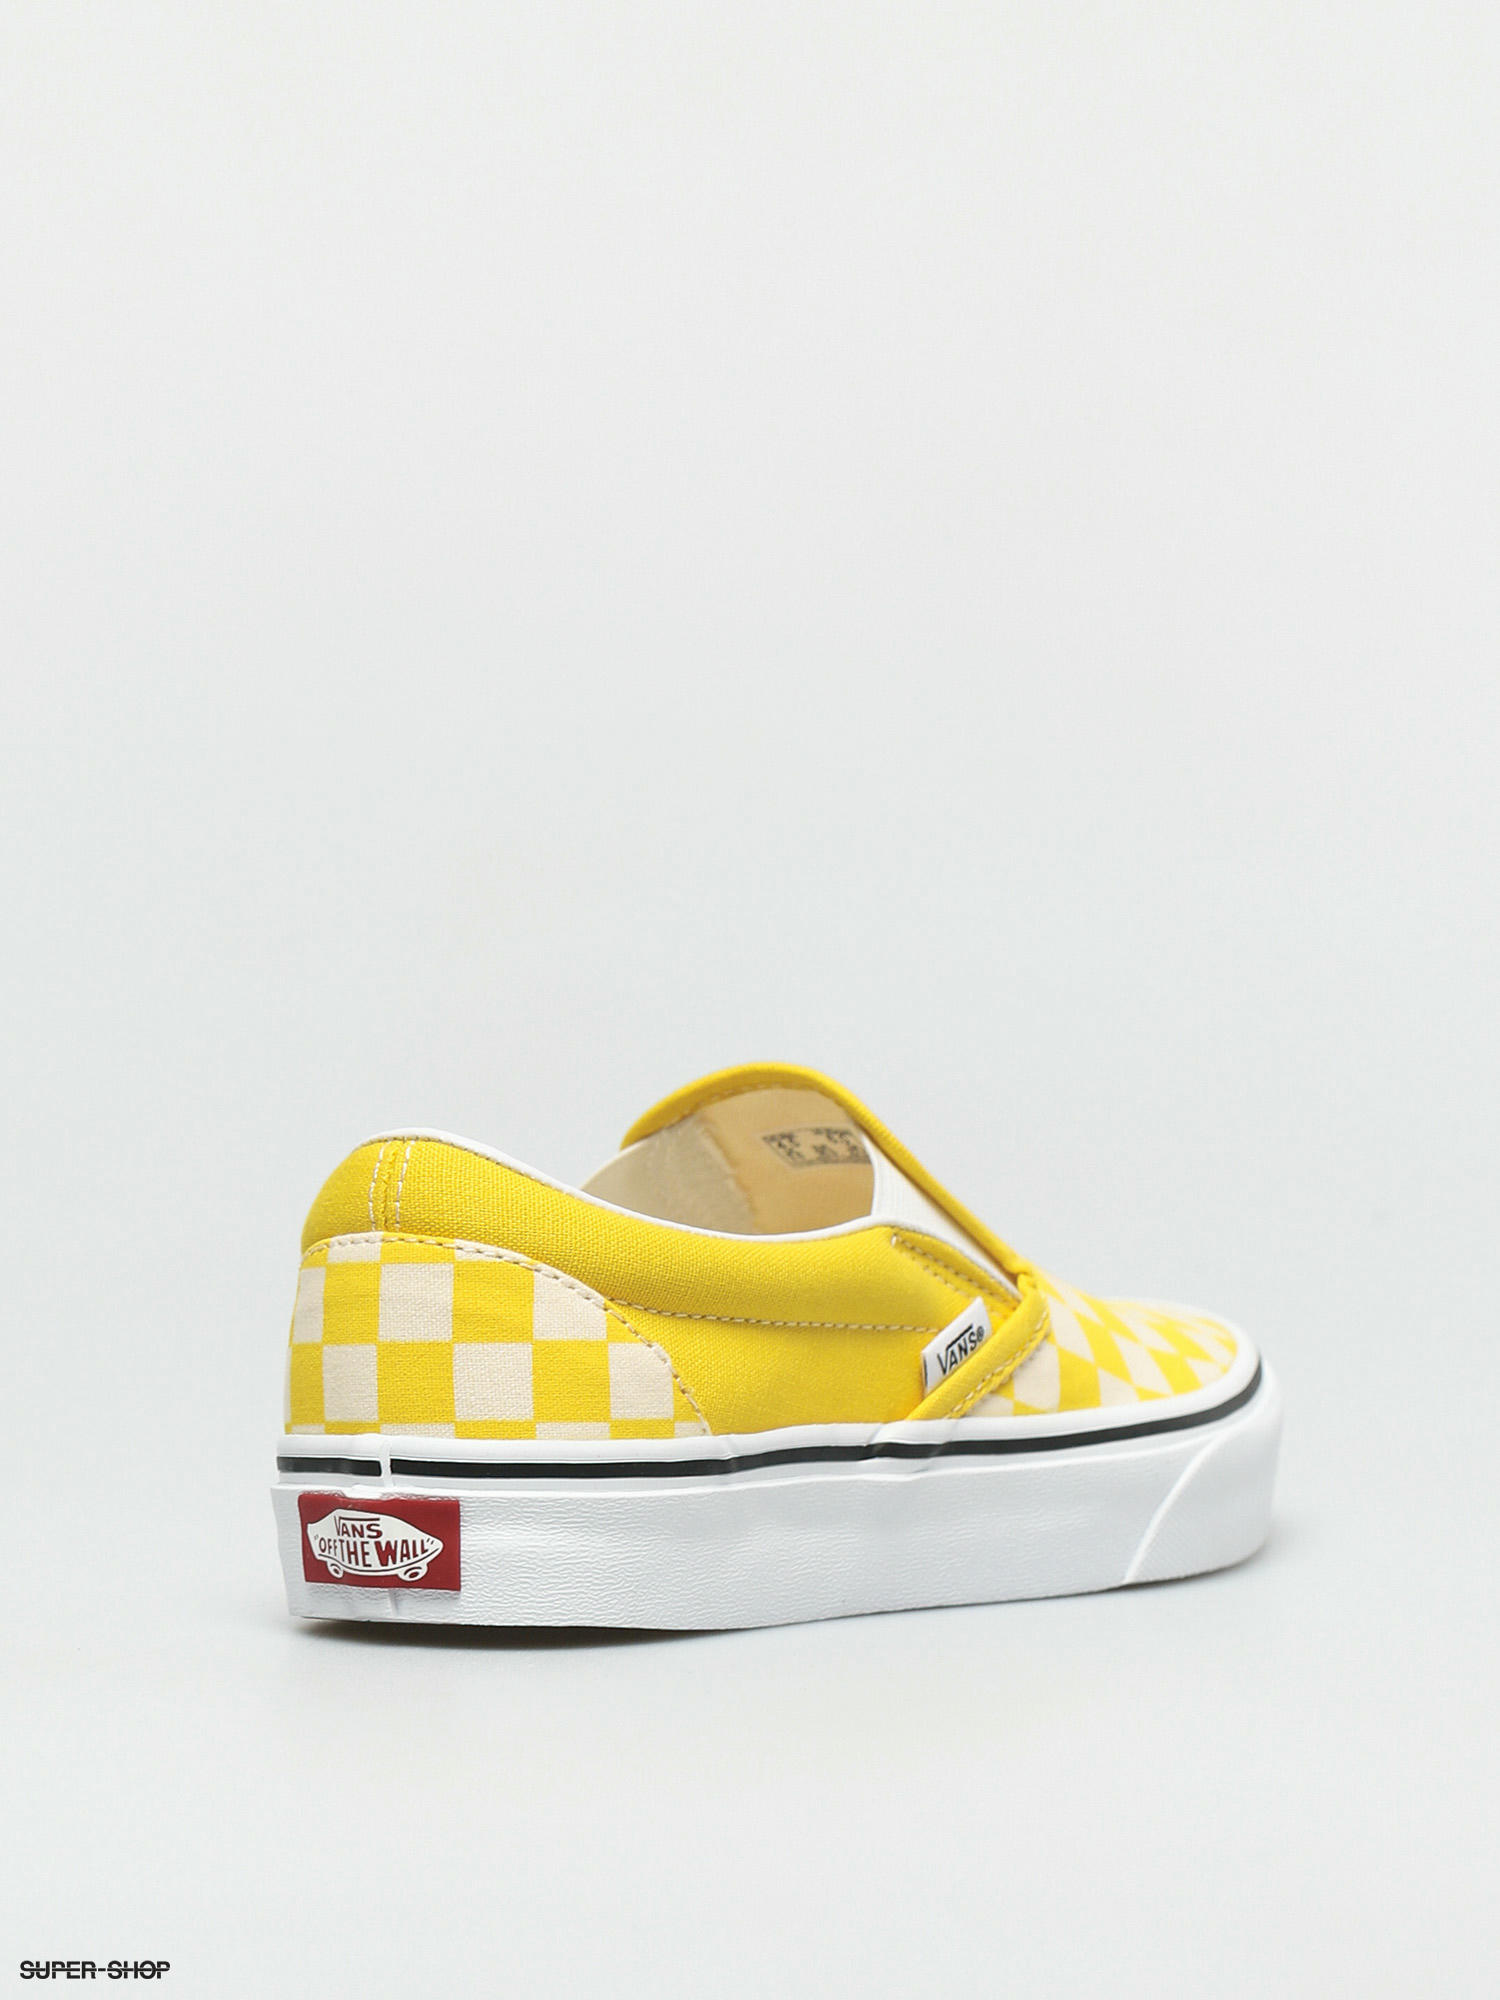 Shoes (checkerboard cyber yellow/true 